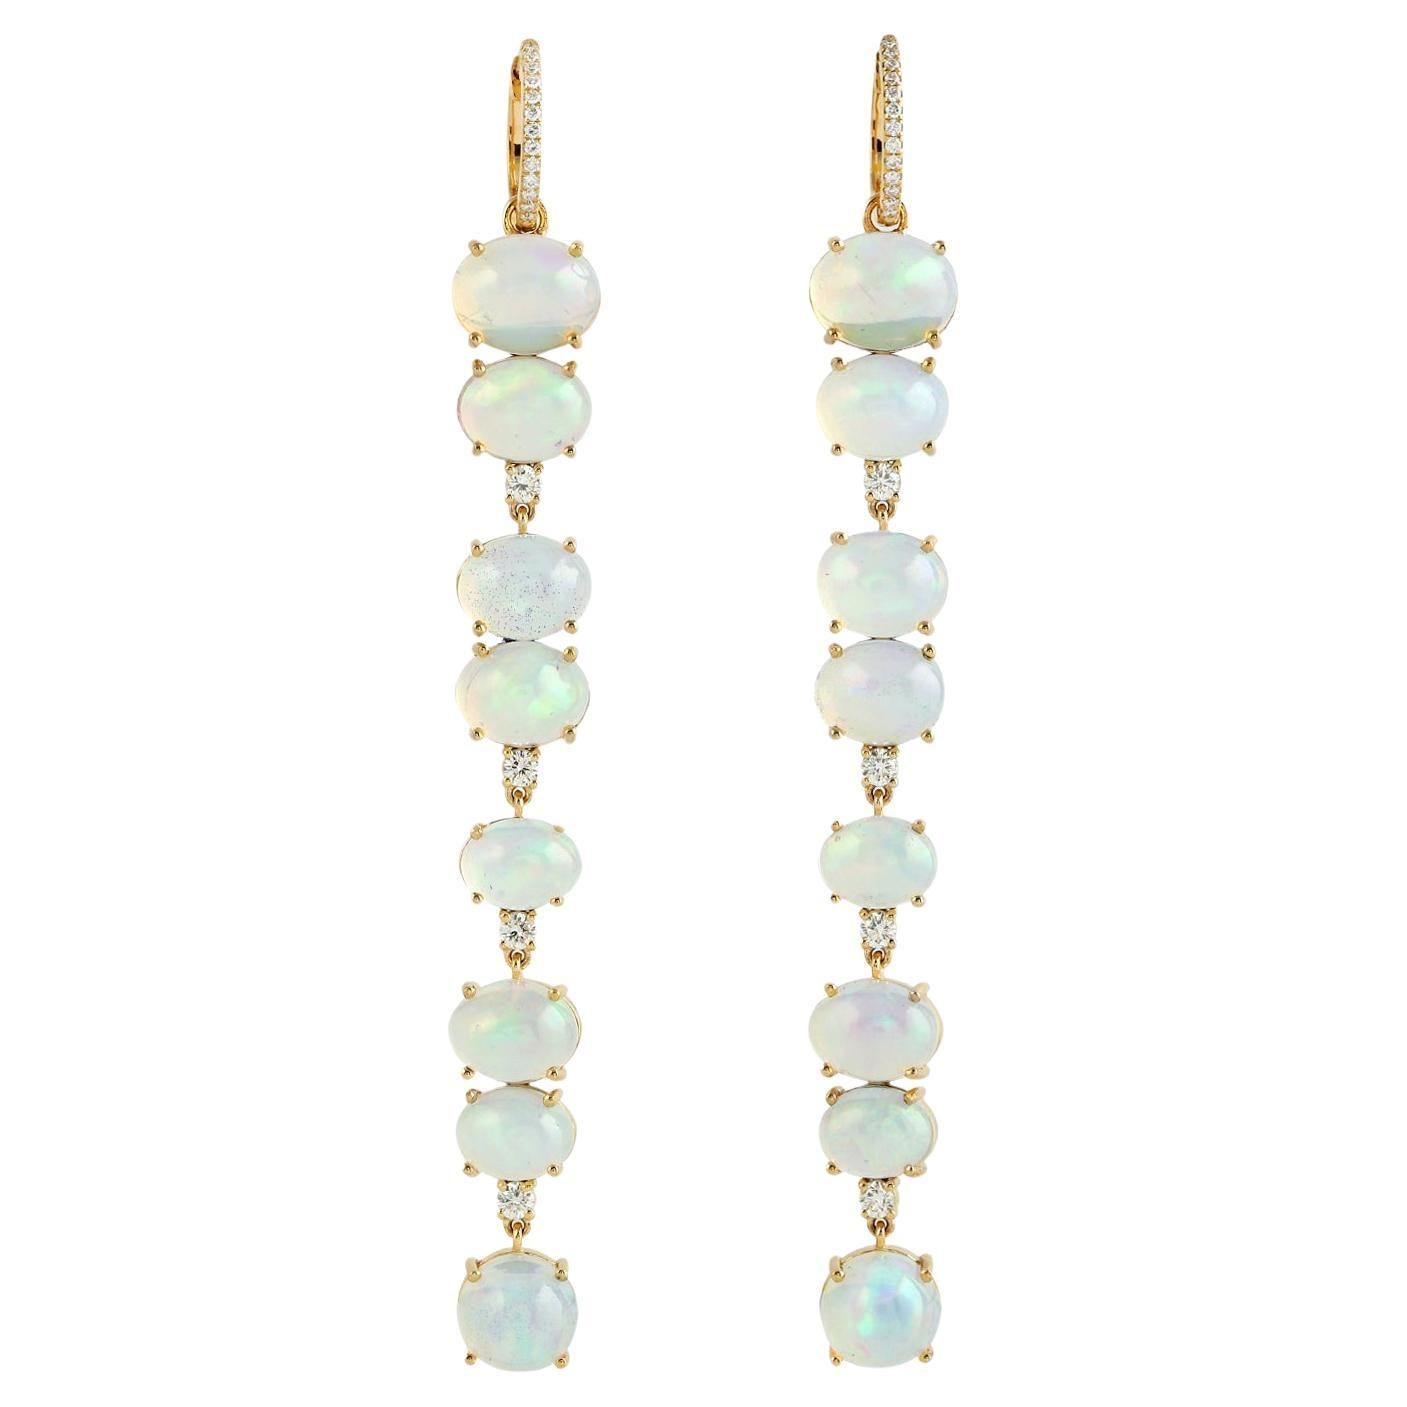 19.19 ct Ethiopian Opal Dangle Earrings With Diamonds Made In 18K Yellow Gold For Sale